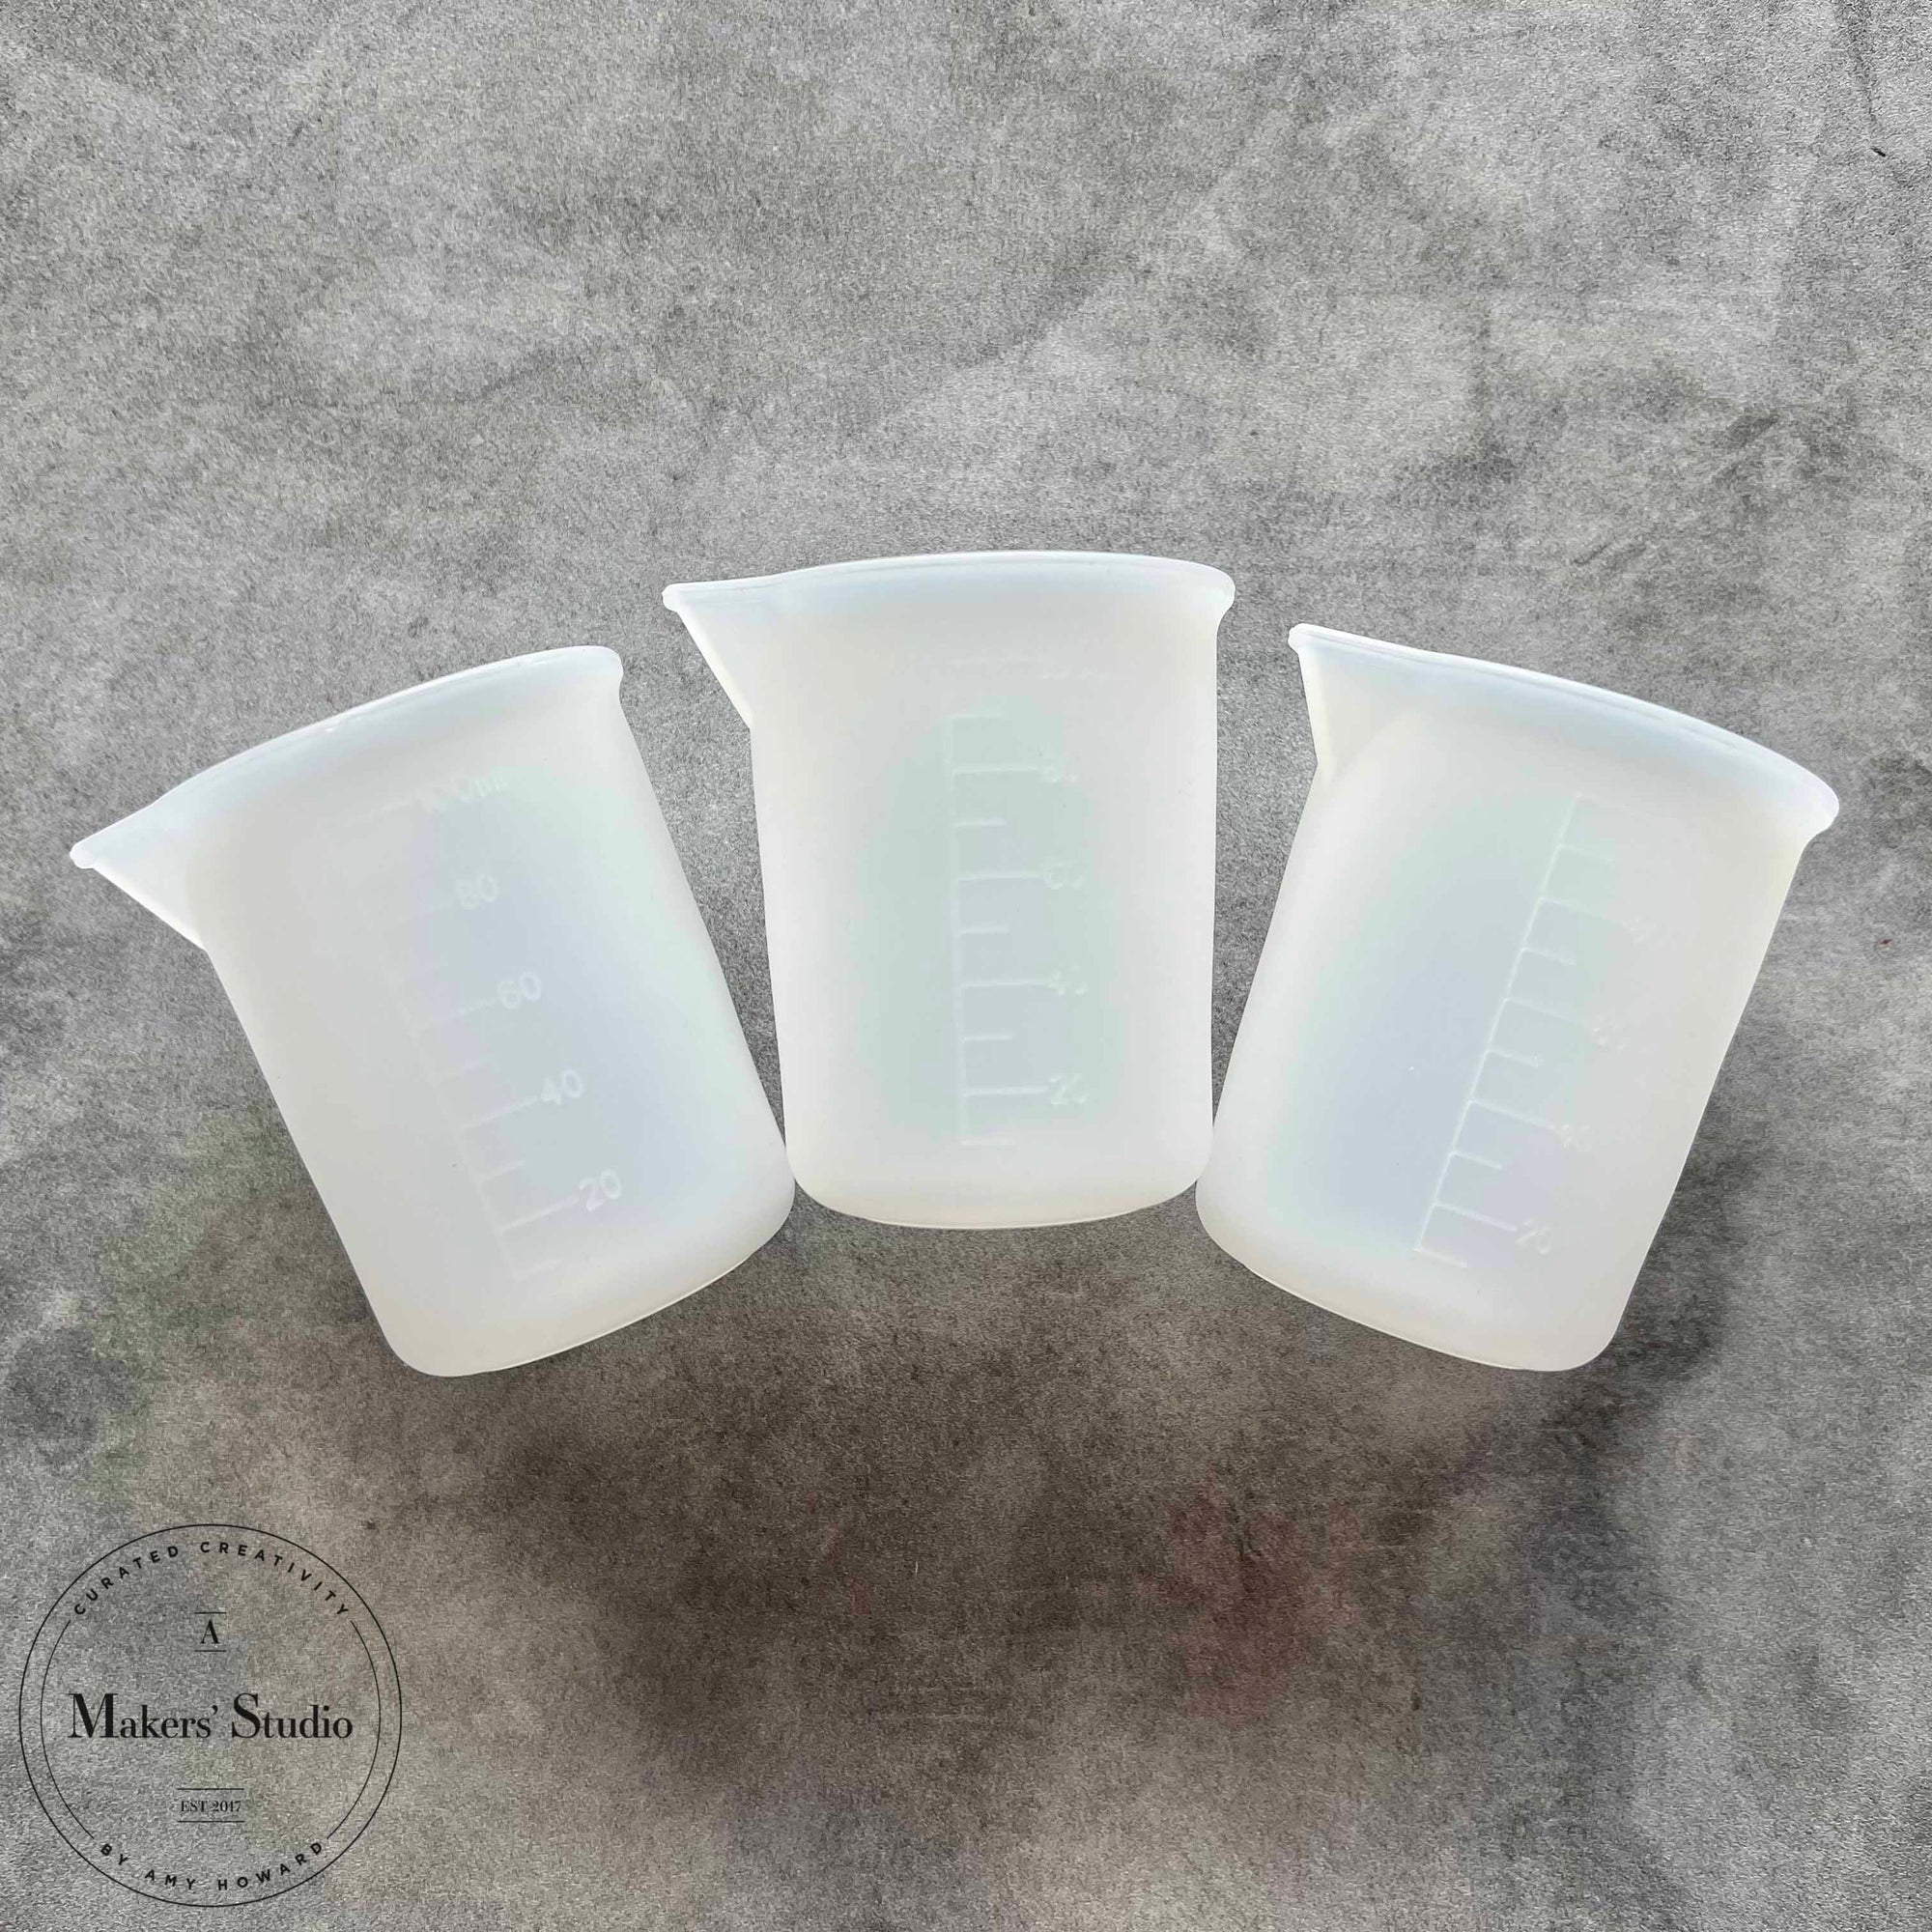 Small Measuring Cup - Set of 3